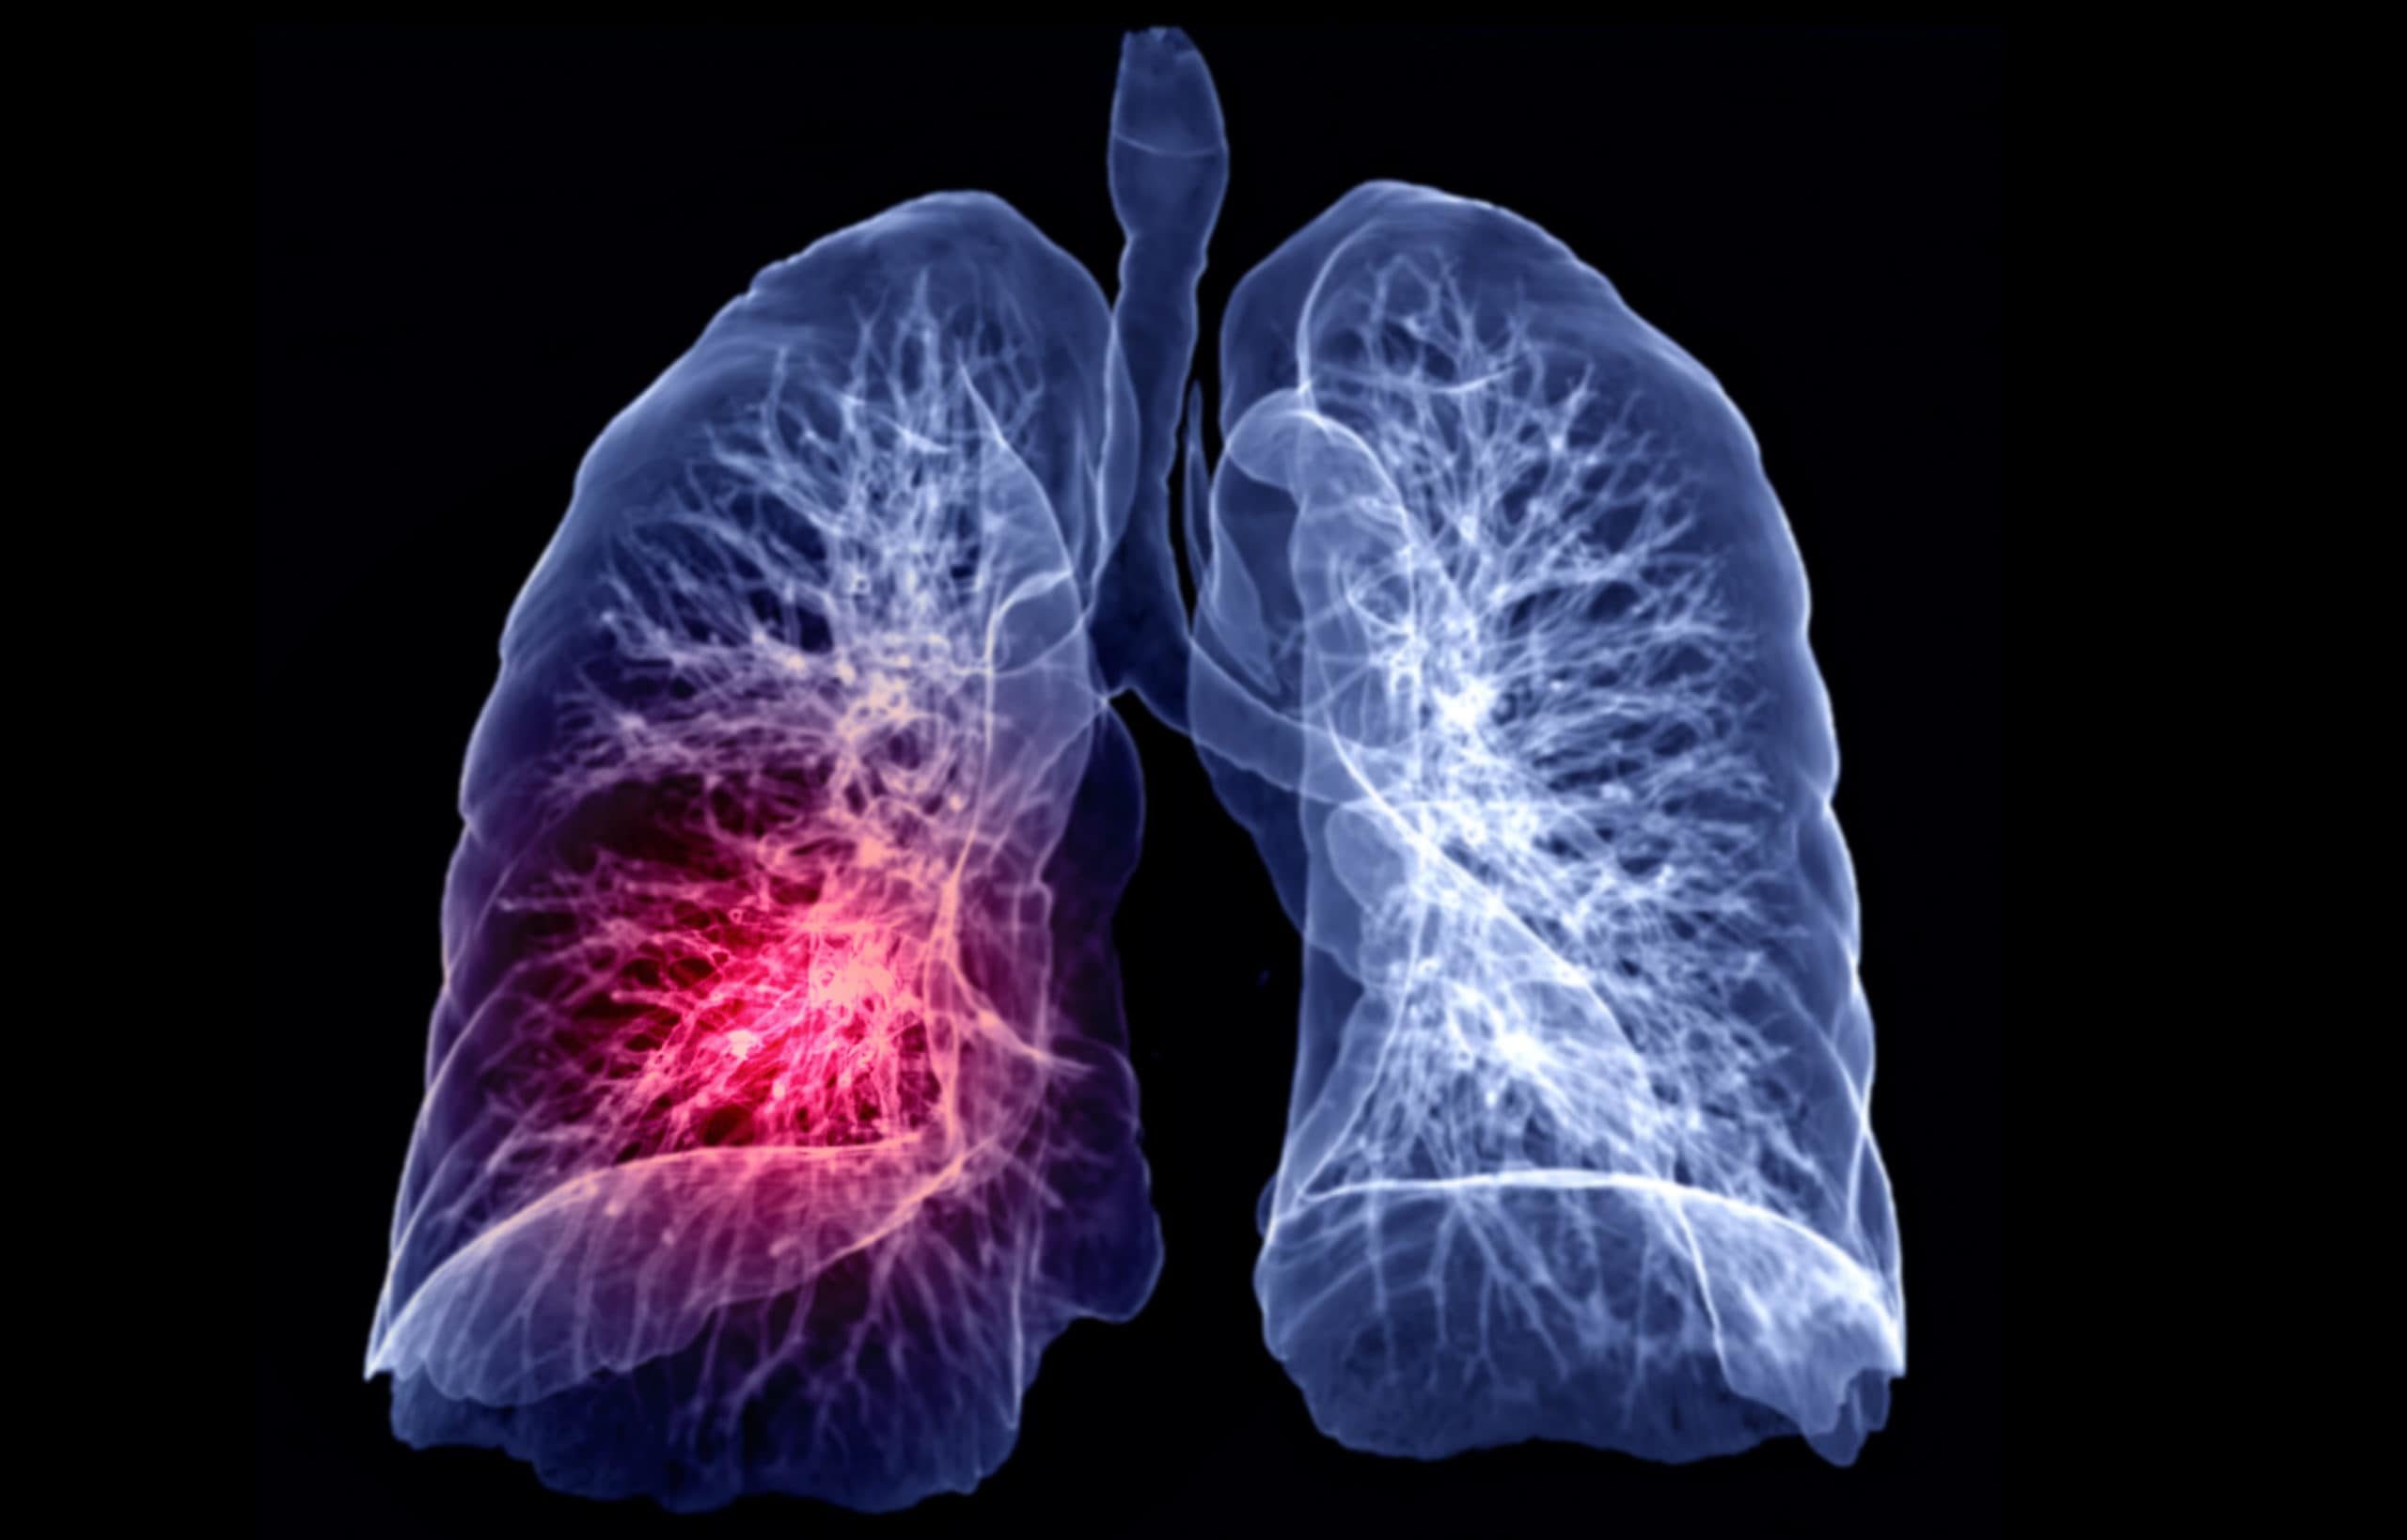 Lung scan image